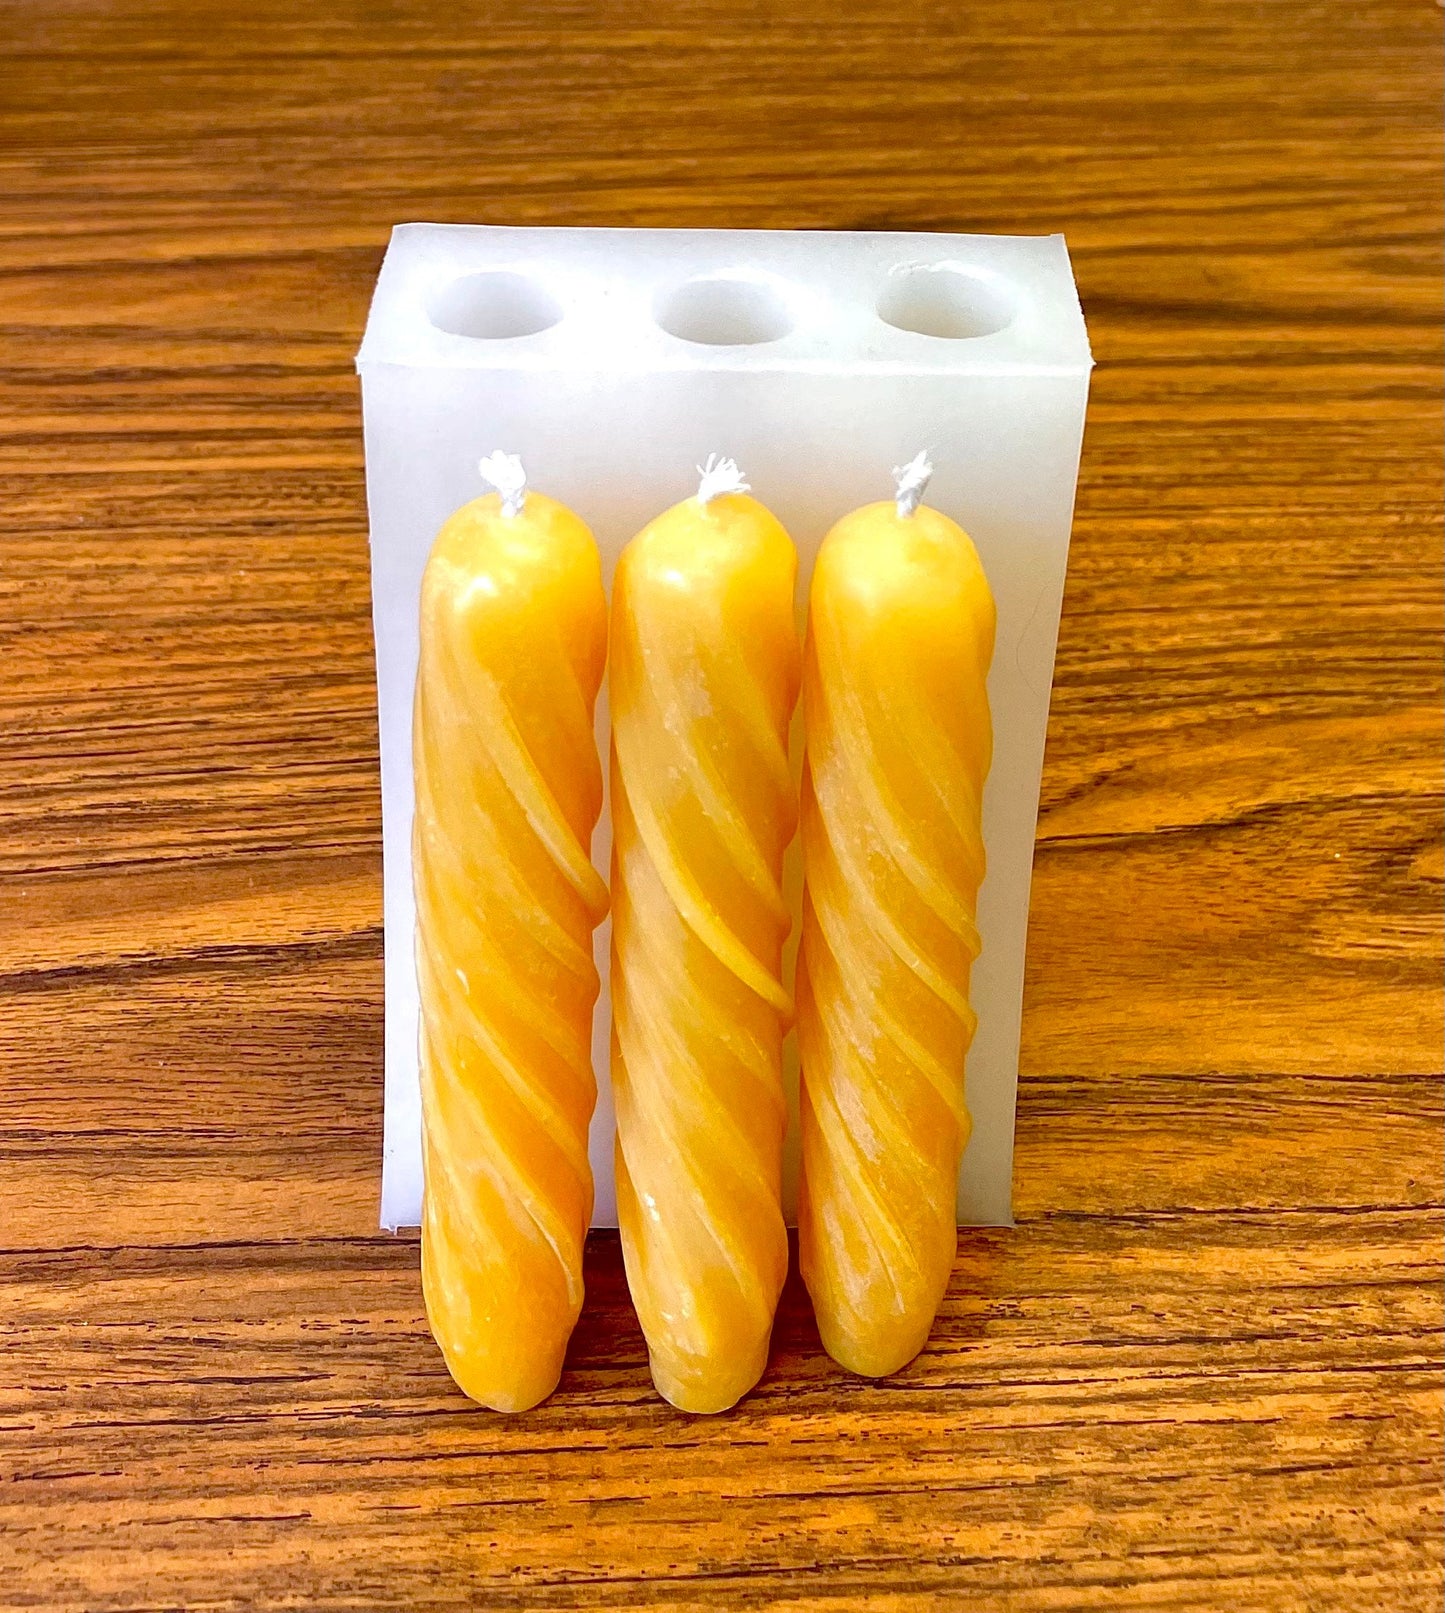 Silicone twisted taper candle mold 4.75” - spiral taper mold - mini taper Mold - beeswax candle mold - 3 cavities - homemade